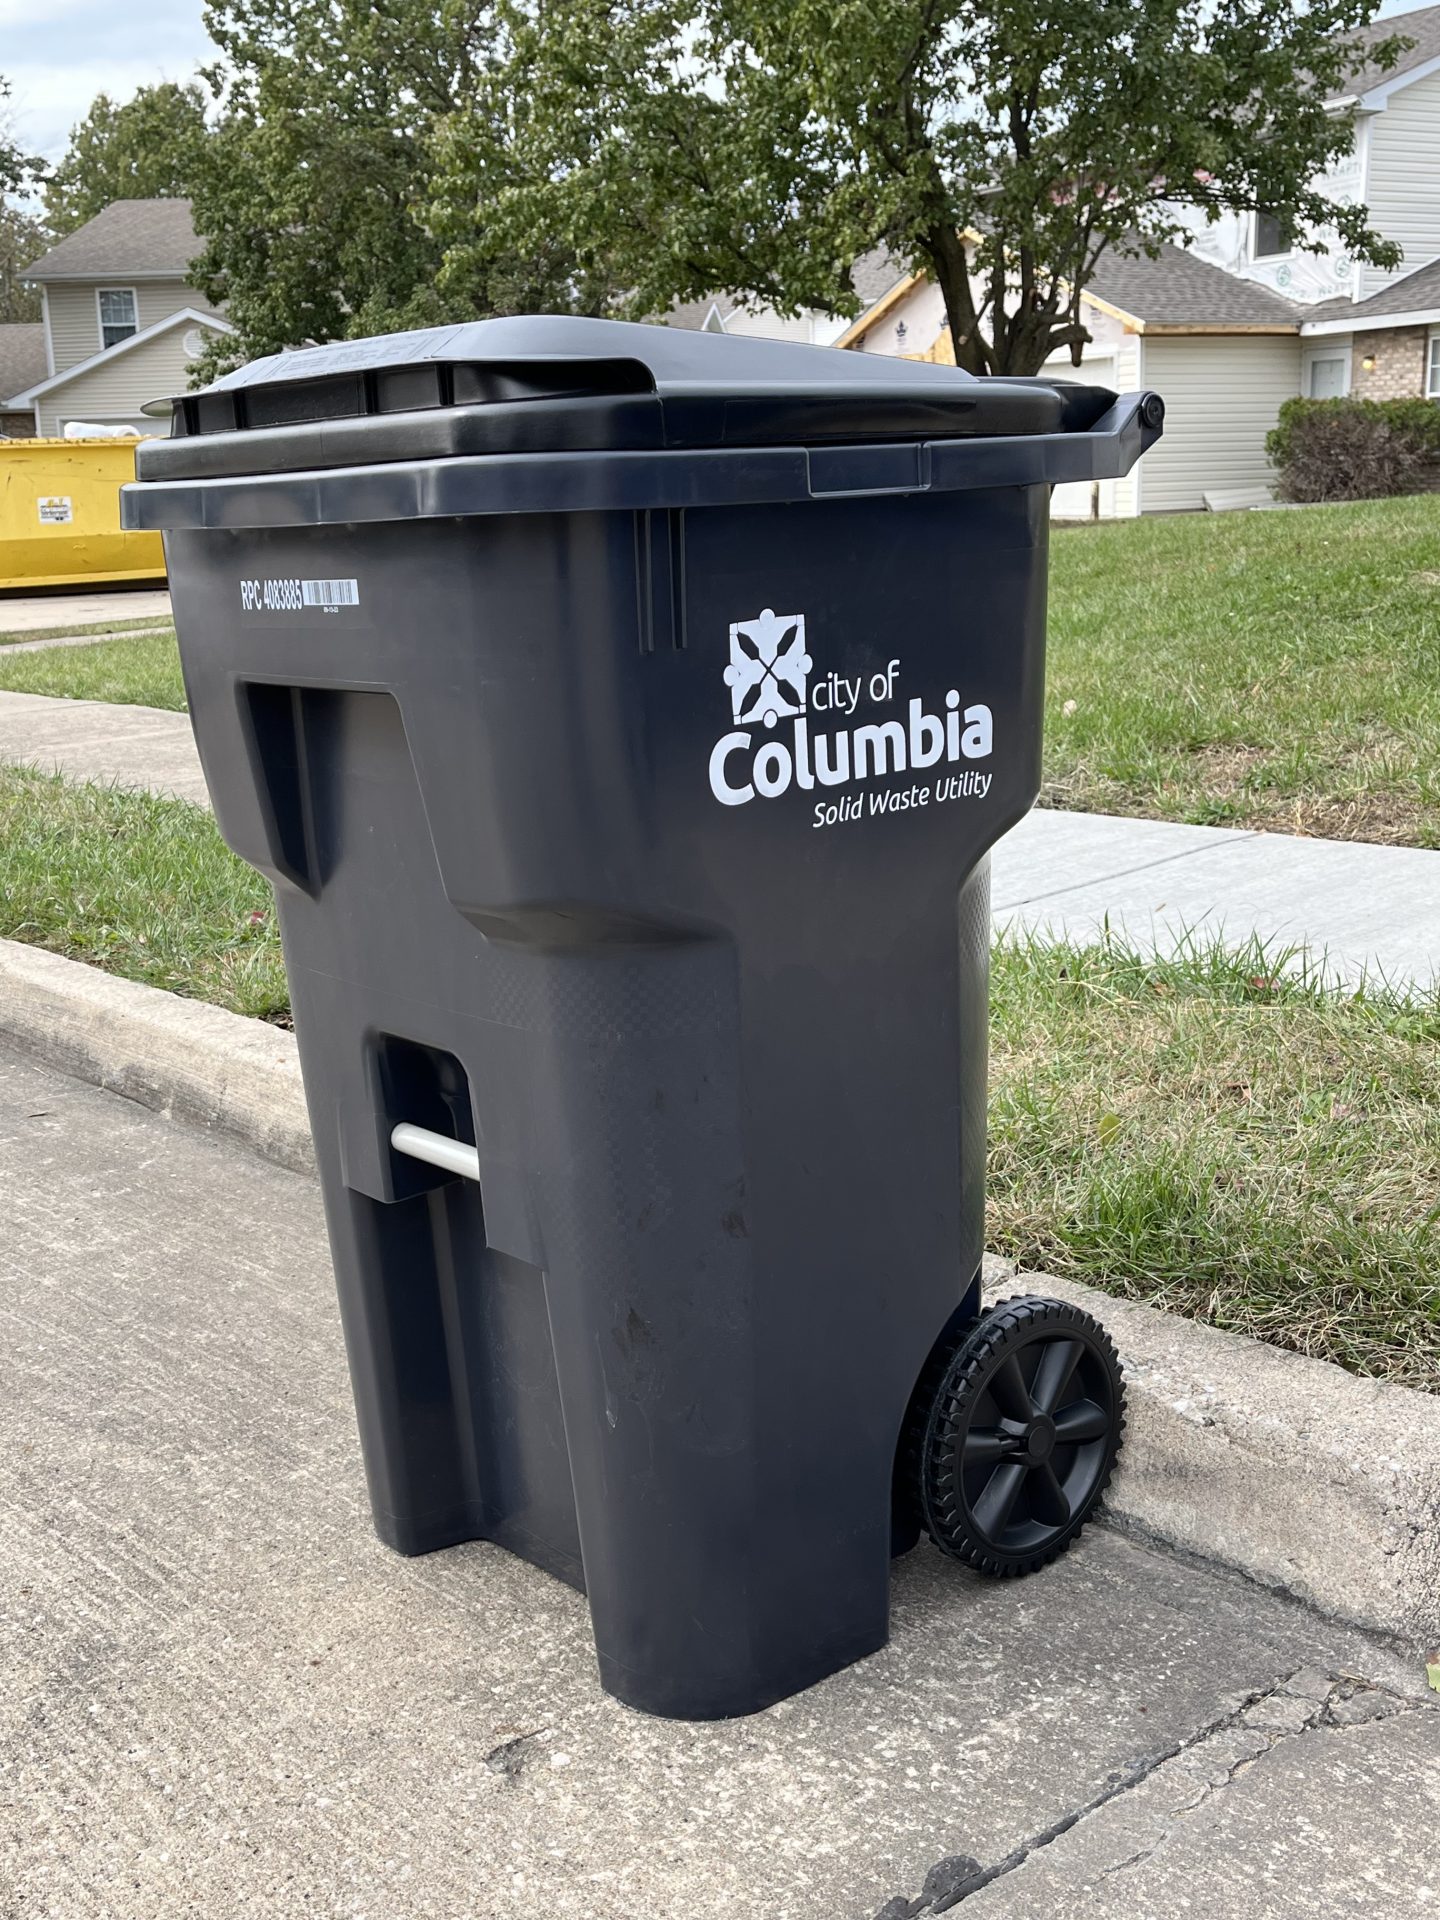 After more than a decade of debate, Columbia starts using roll carts today